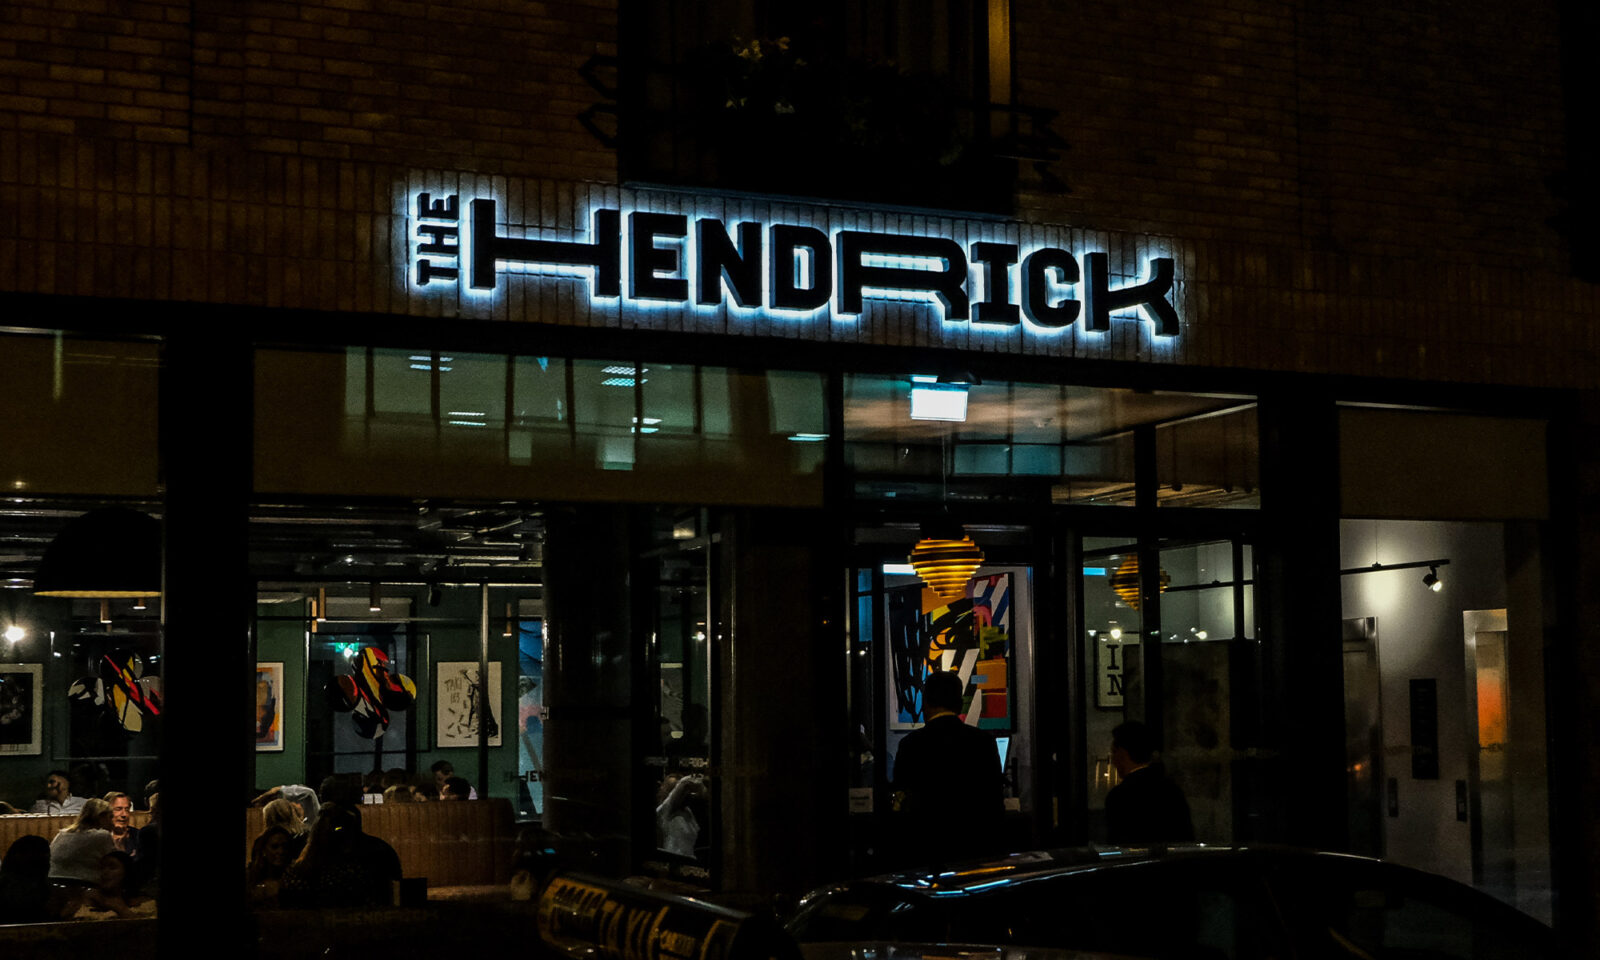 The Hendrick signage from outside hotel